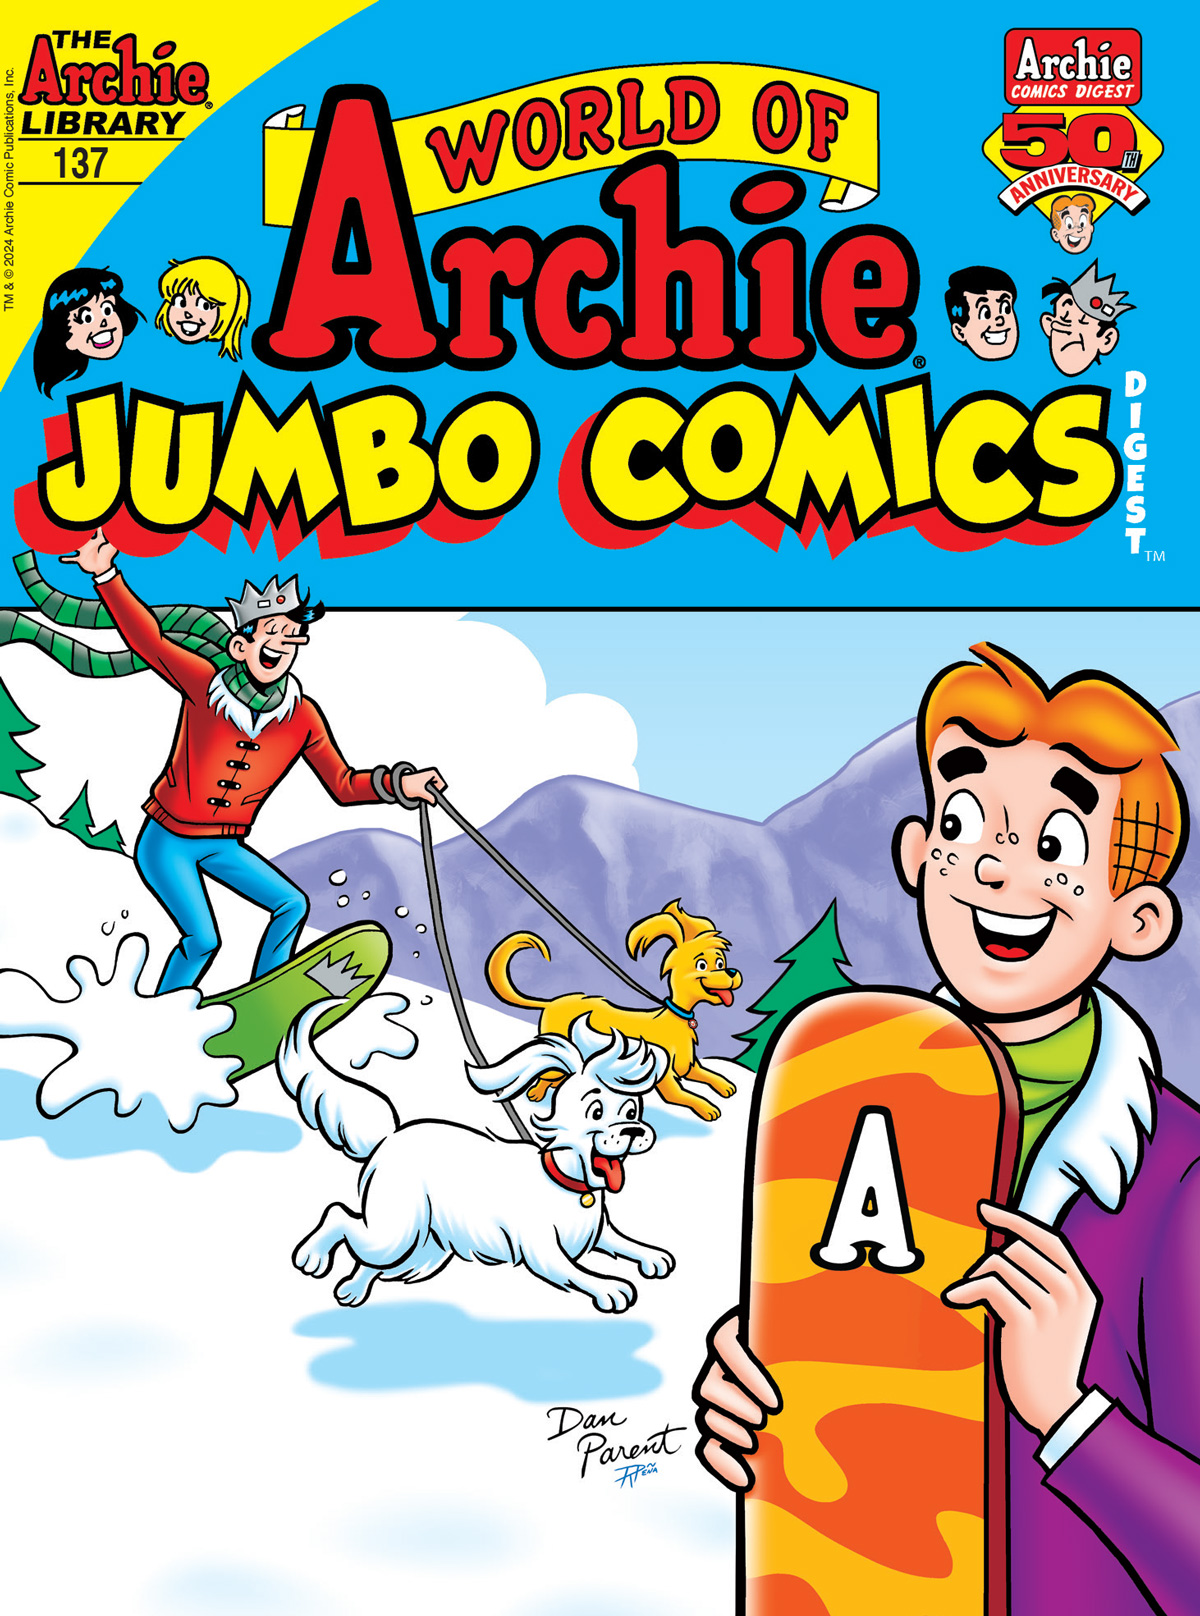 Archie and Jughead snowboard down a hill. Jughead has theit two dogs, Vegas and Hotdog, on leashes.